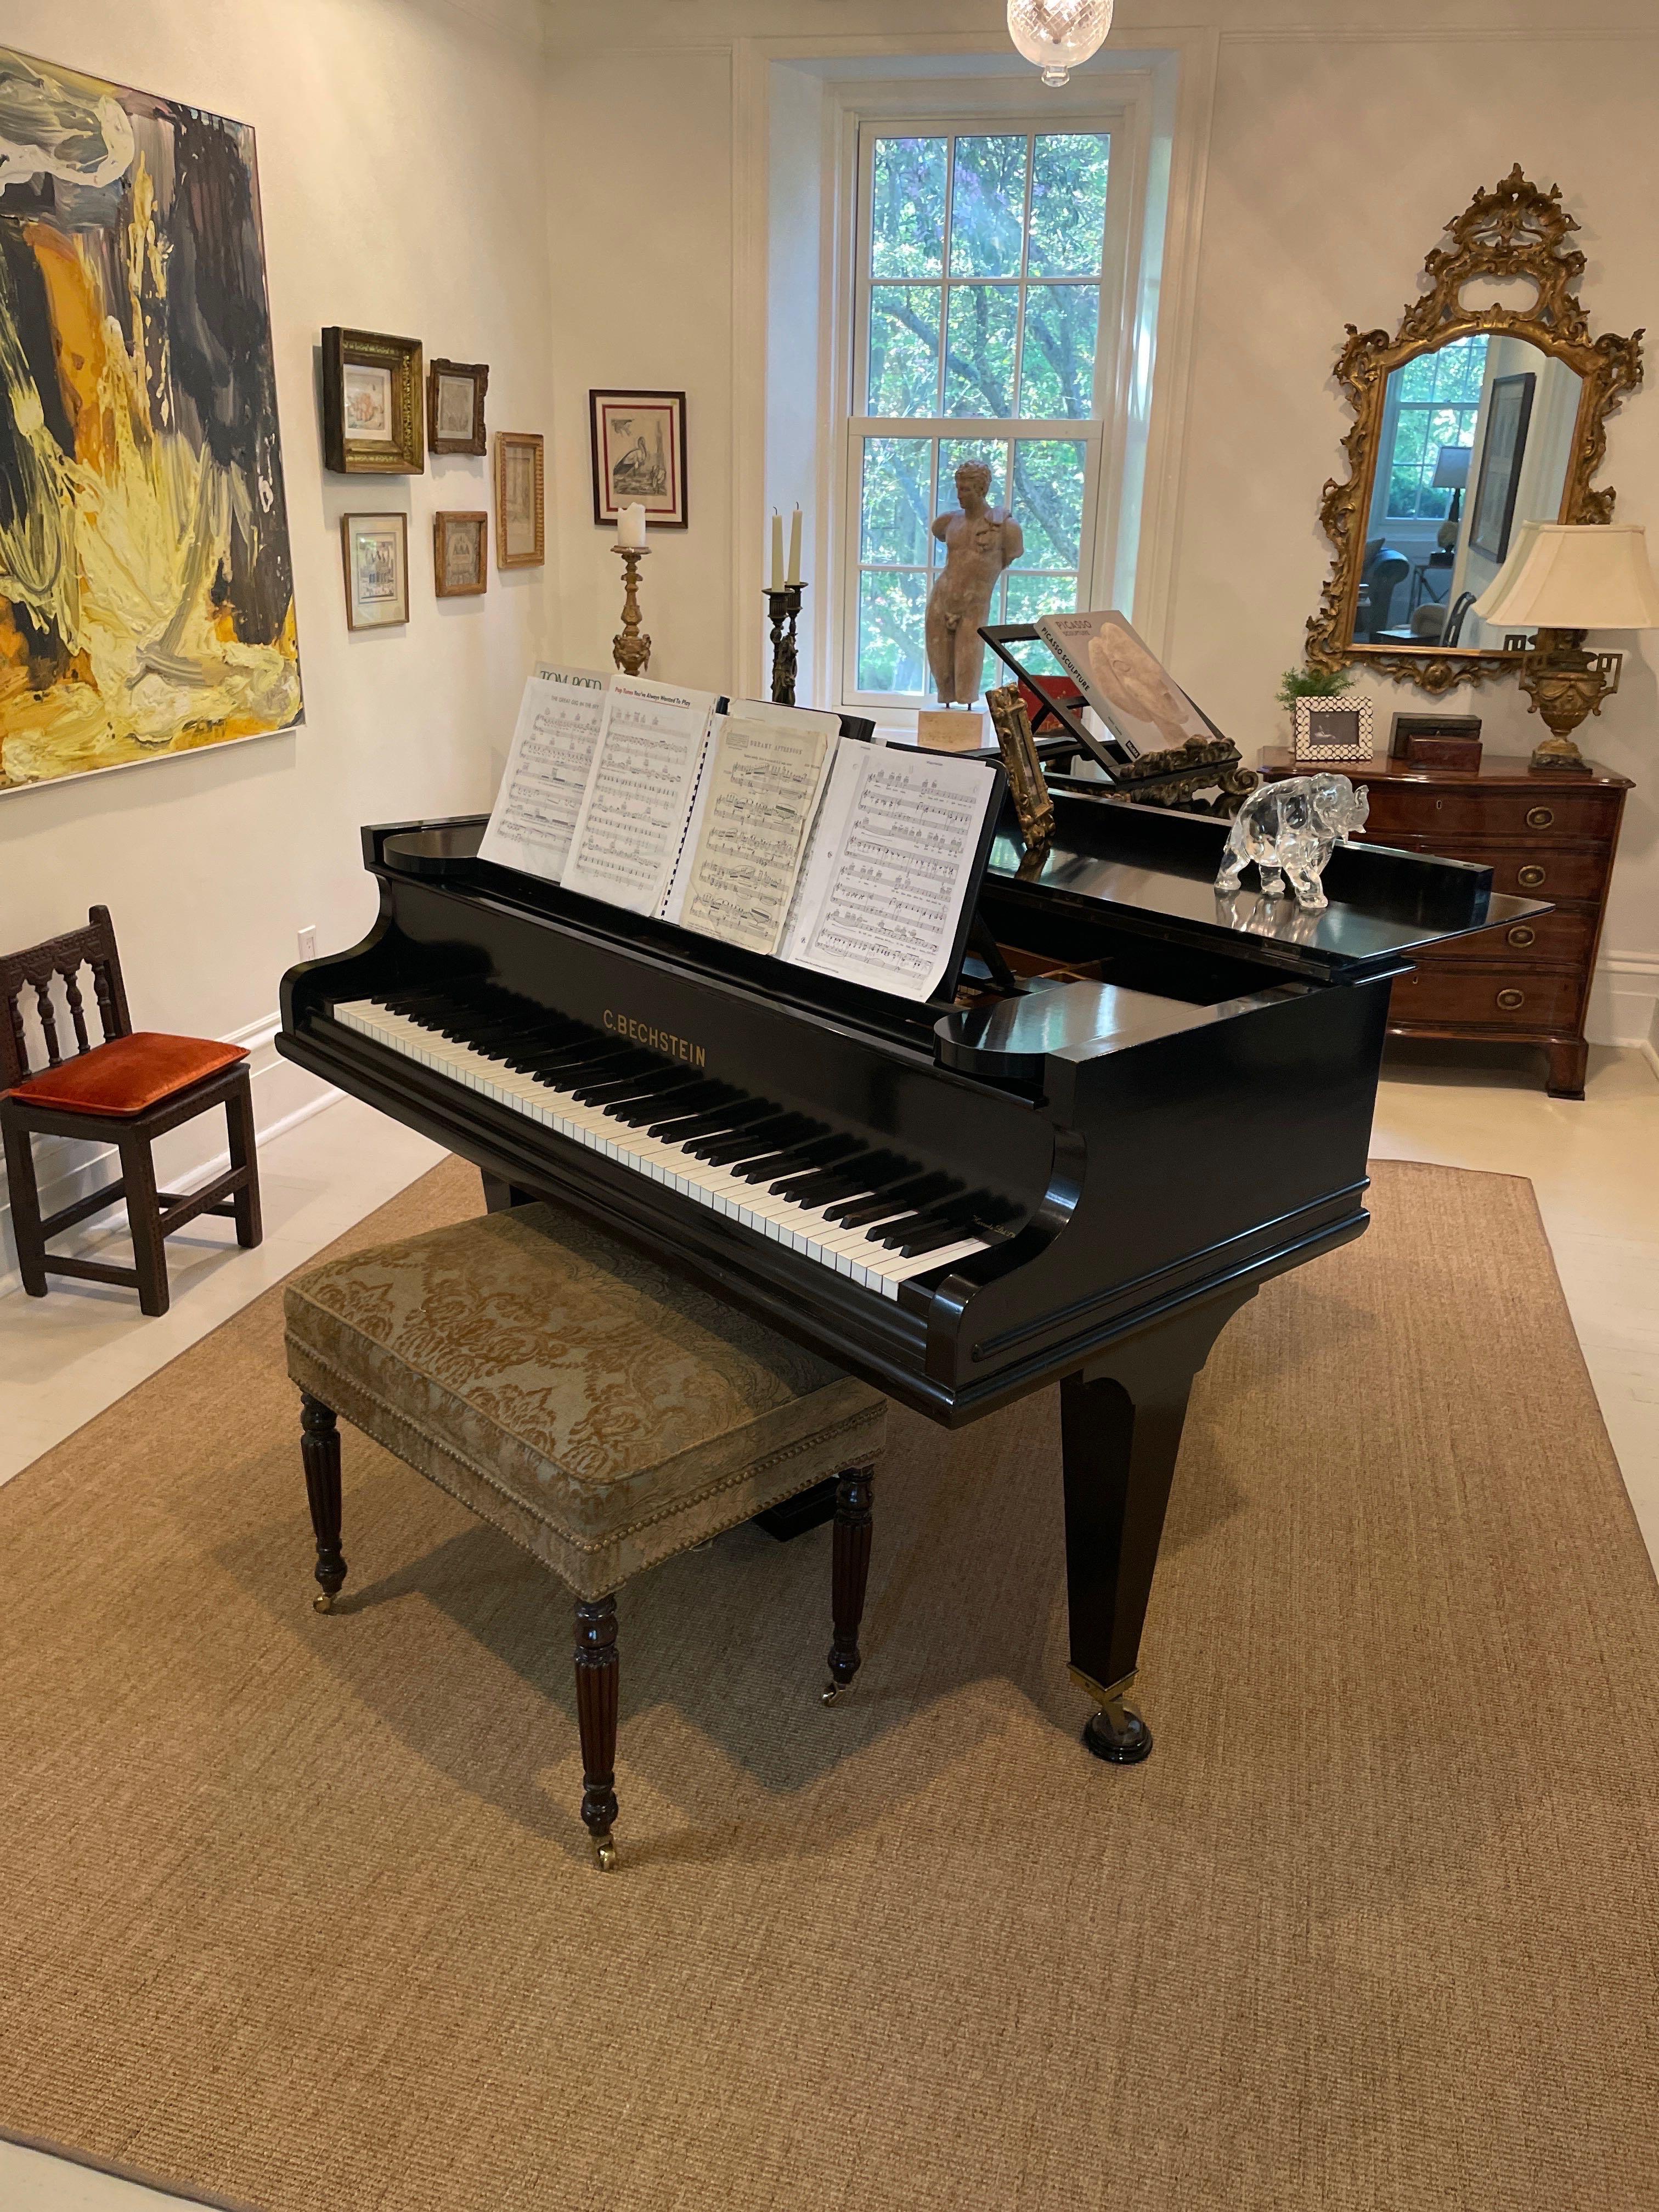 Made for Harrods of London this C. Bechstein has incredibly subtle key action and wonderful tone . Dating from the 1920’s it comes apart easily for transport and is a wonderful size for any living space.